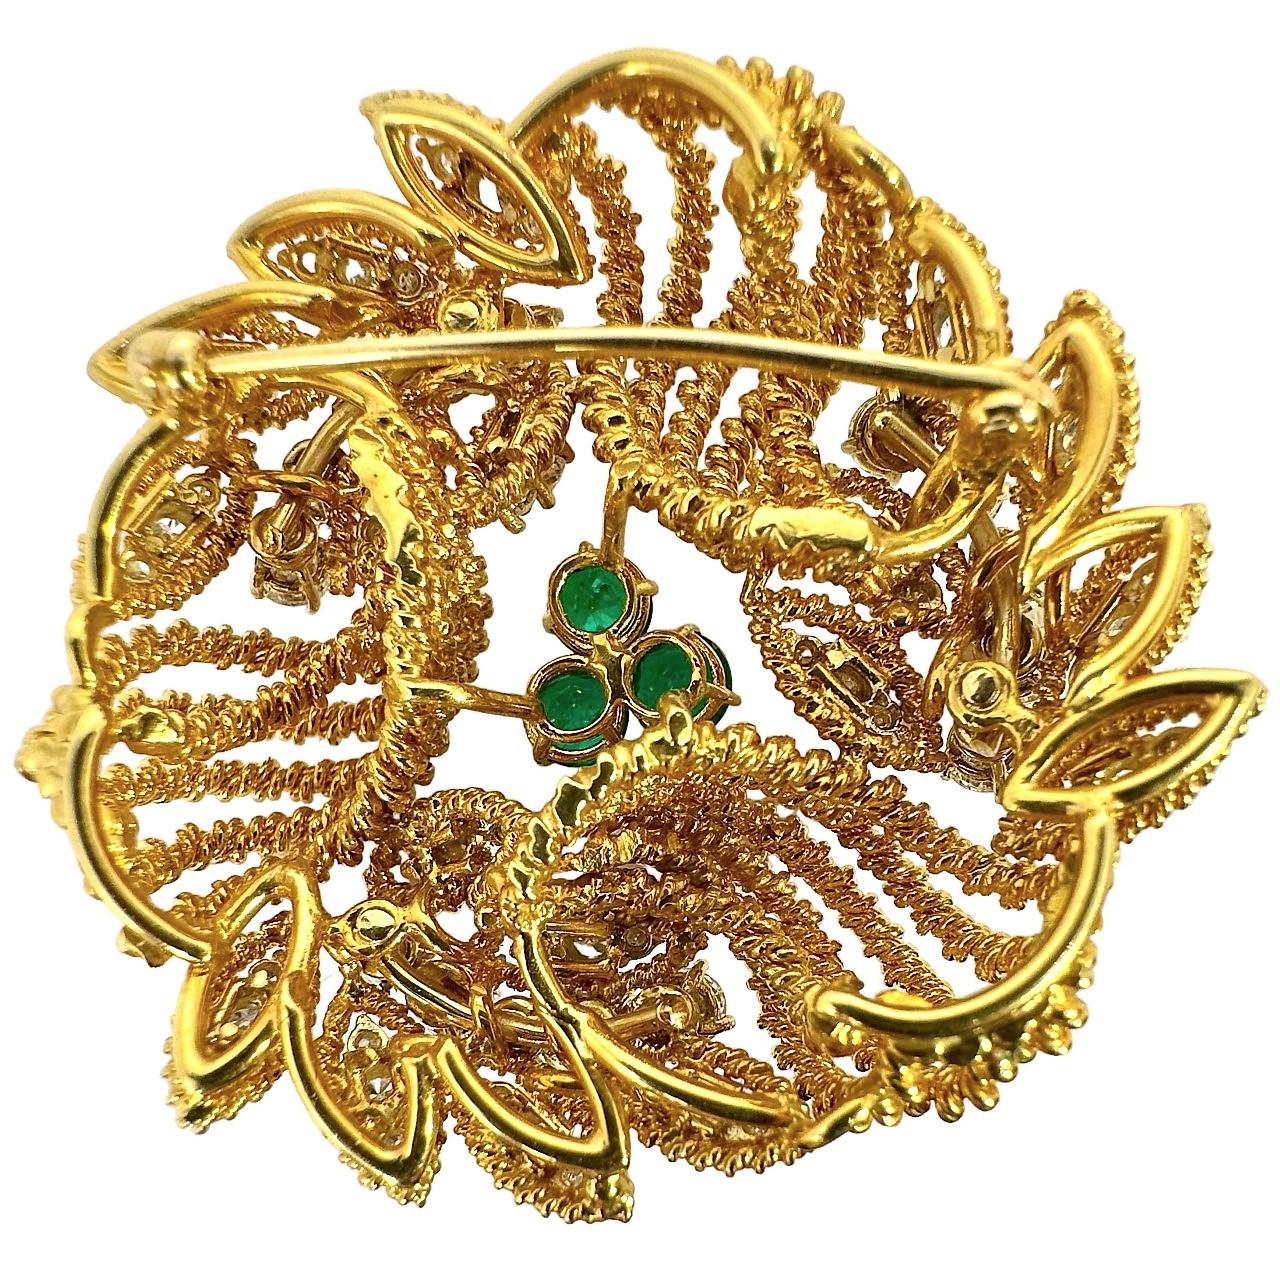 This wonderful and visually exciting Mid-20th Century 18k yellow gold brooch,  is a perfect blending  of hand crafting with fine diamonds and emeralds. Every surface is produced by pulling or twisting 18k gold wire and, the effect is sensational.